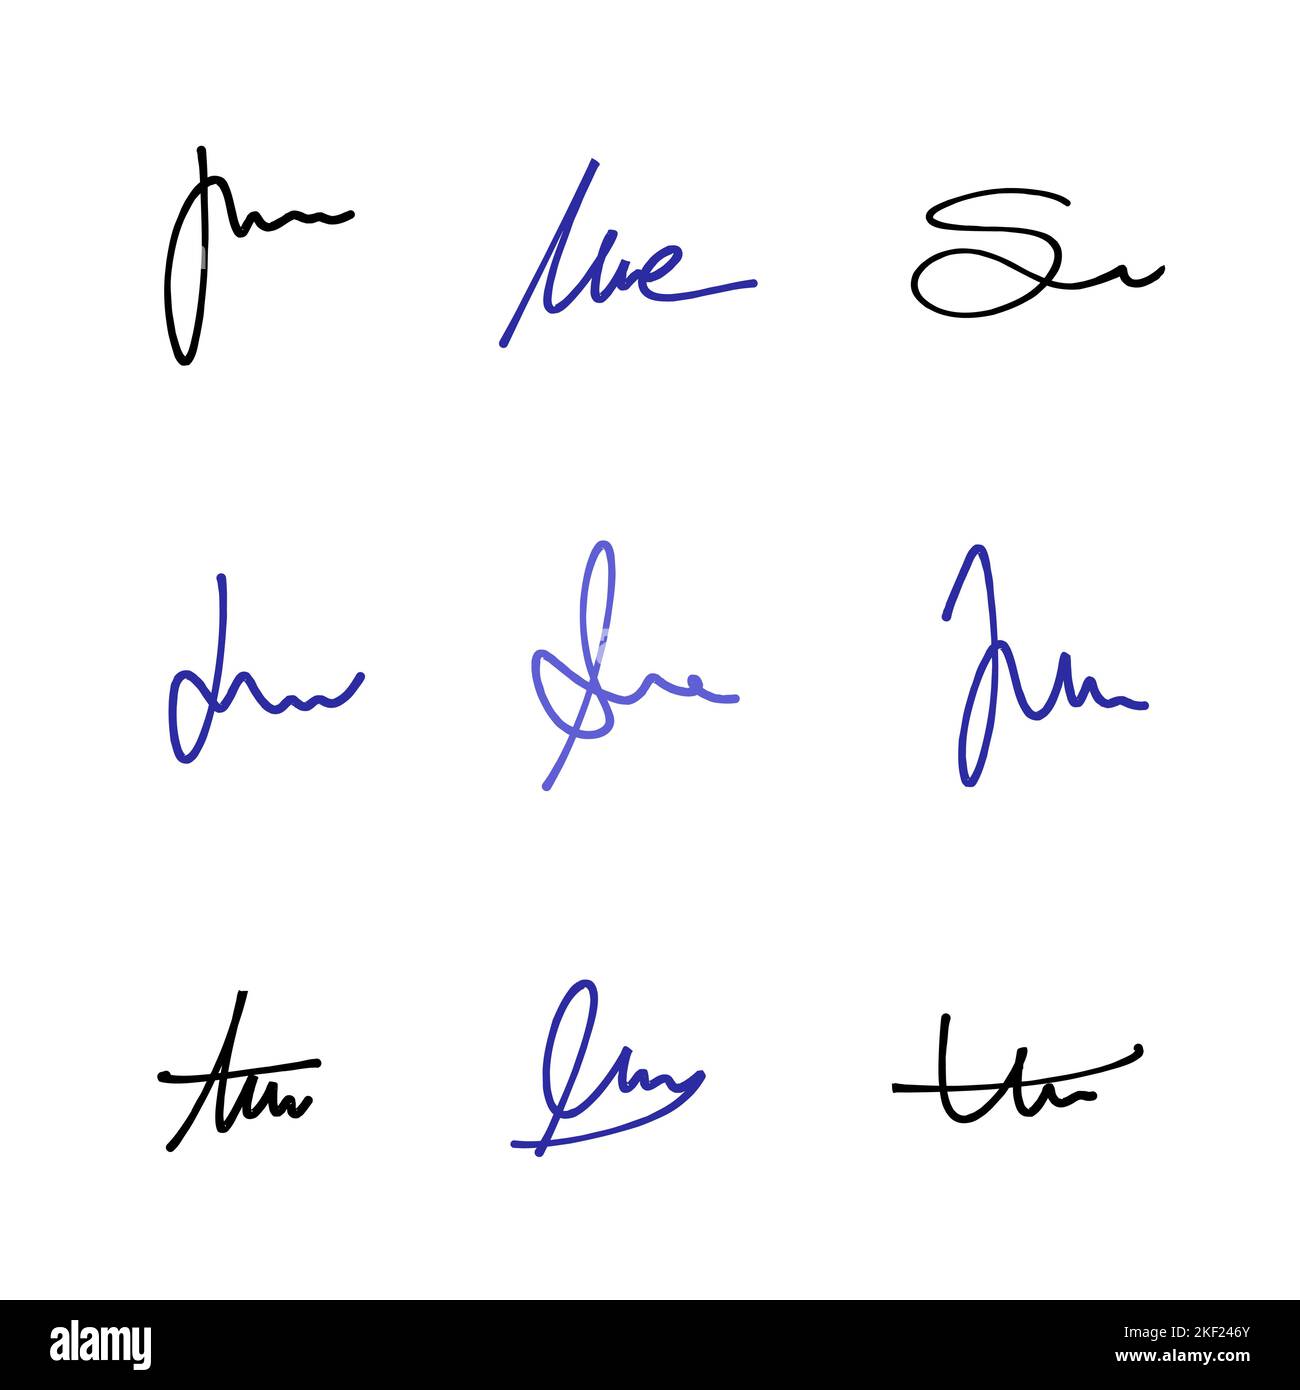 Handwriting signature set. Vector pack with isolated imaginary personal handwriting scribble signatures. Stock Vector